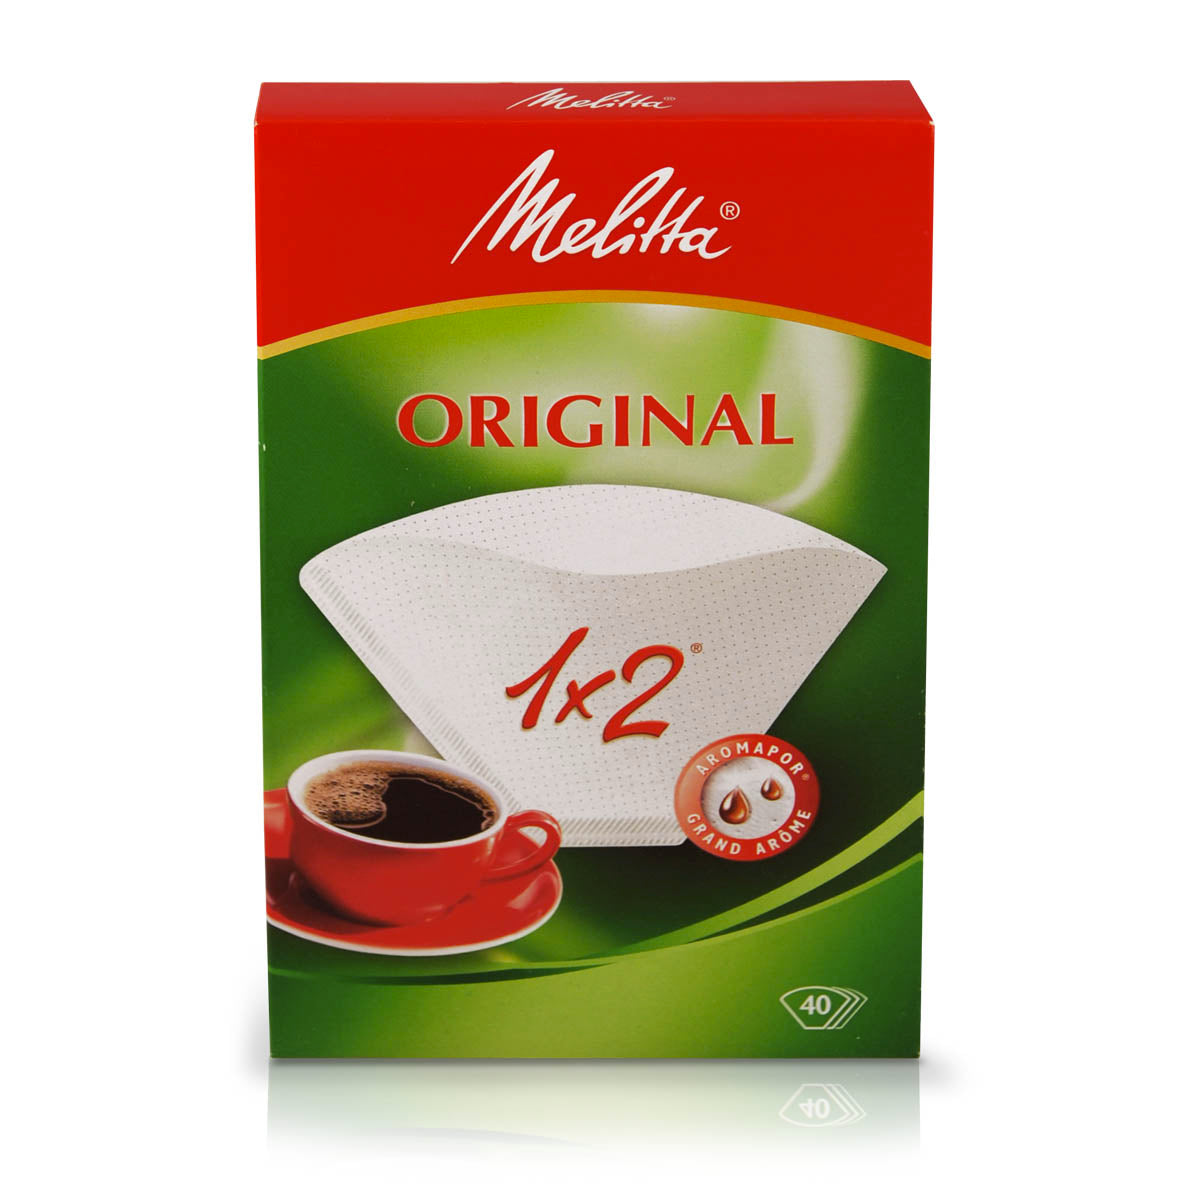 Pack containing 40 Melitta paper filters 1x2 cups | Box of 18 packs